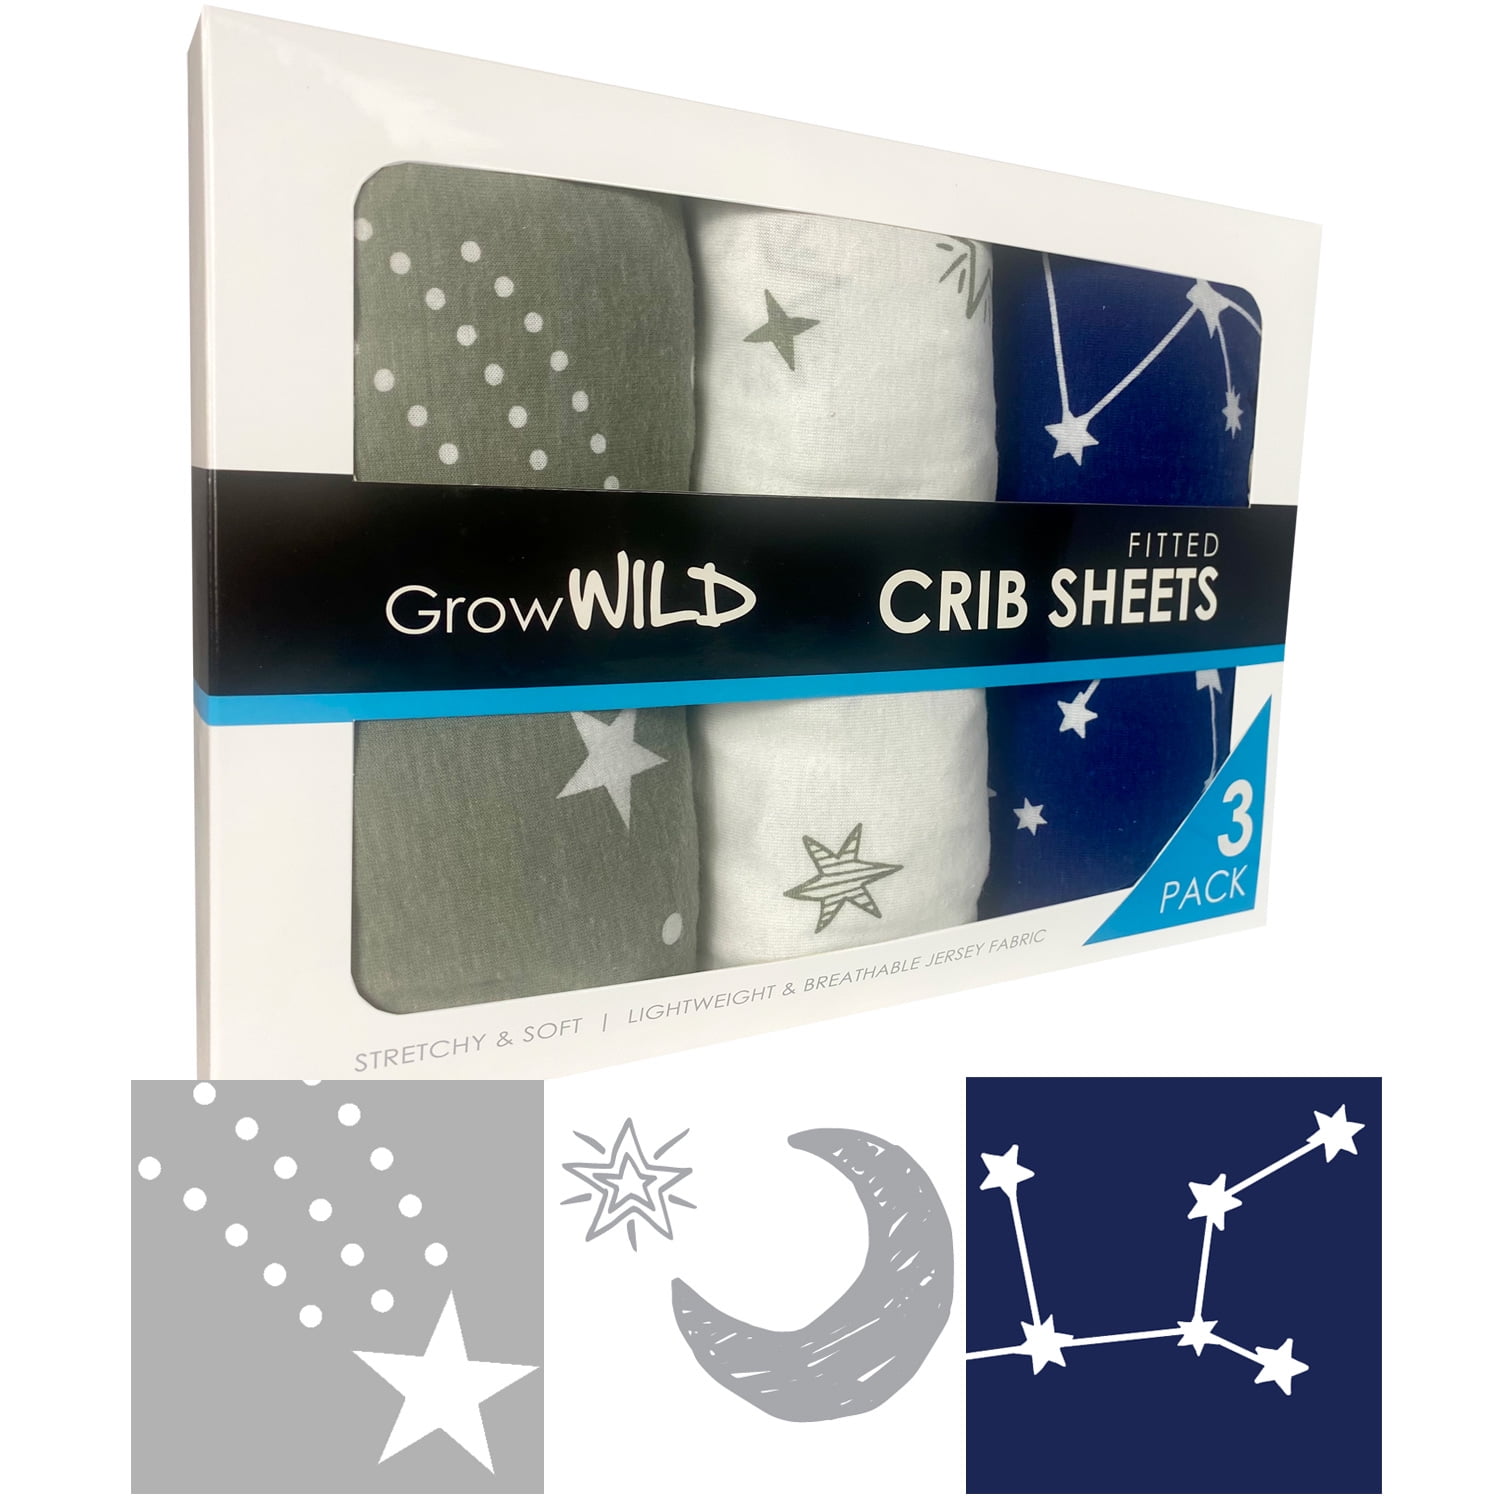 GROW WILD Crib Sheets for Boys or Girls Ocean Whale Narwhal White Blue Baby Crib Sheets for Girl Crib Mattress Sheet or Toddler Bed Sheets 3 Pack Soft Jersey Cotton Fitted Crib Sheets Neutral 